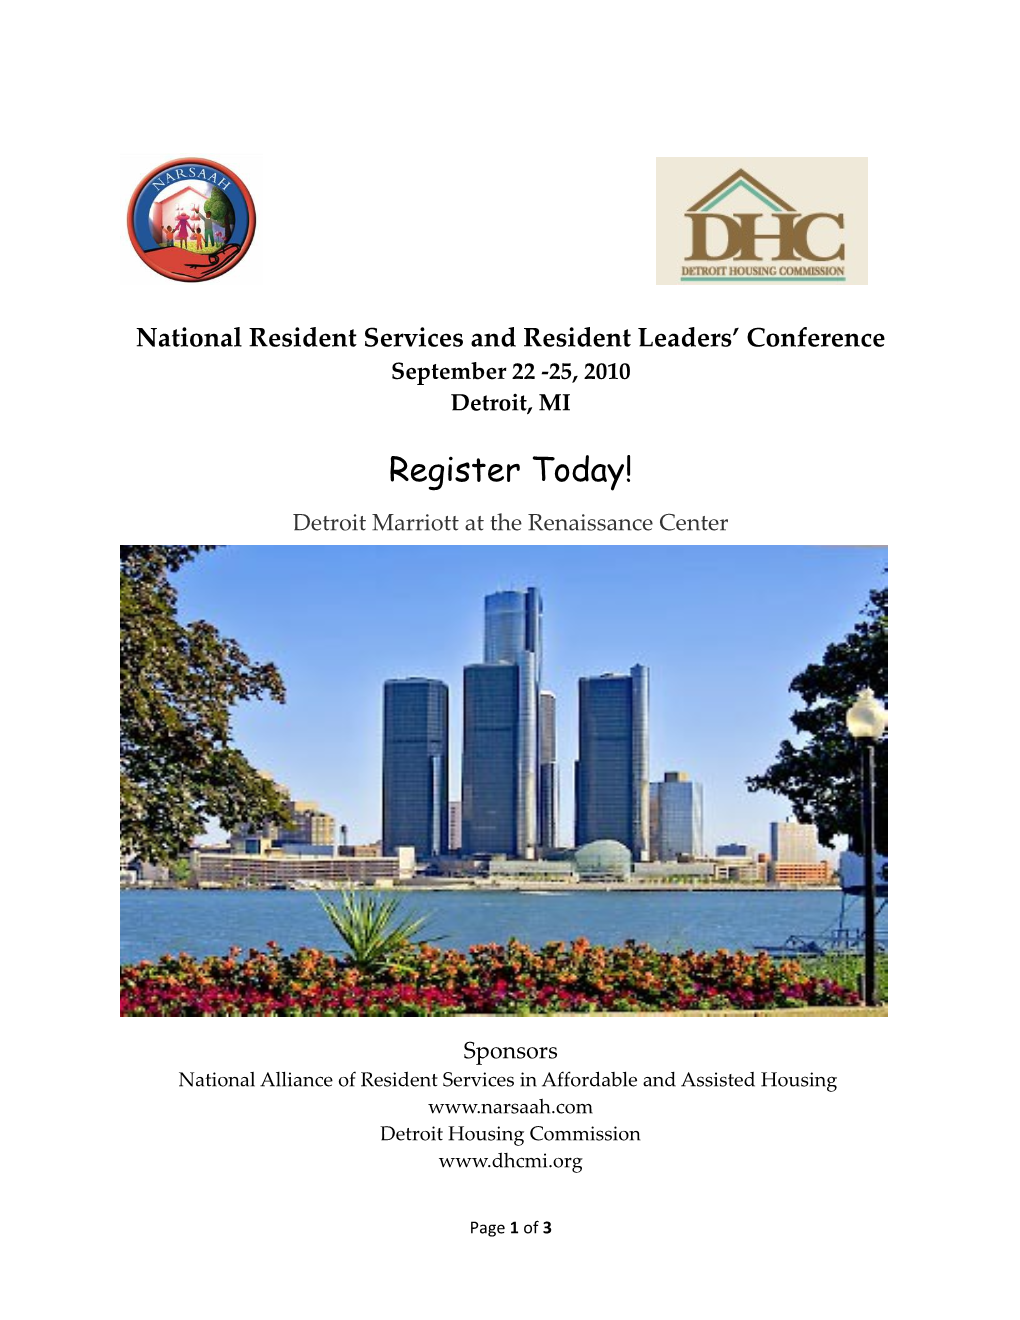 National Resident Services and Resident Leaders Conference